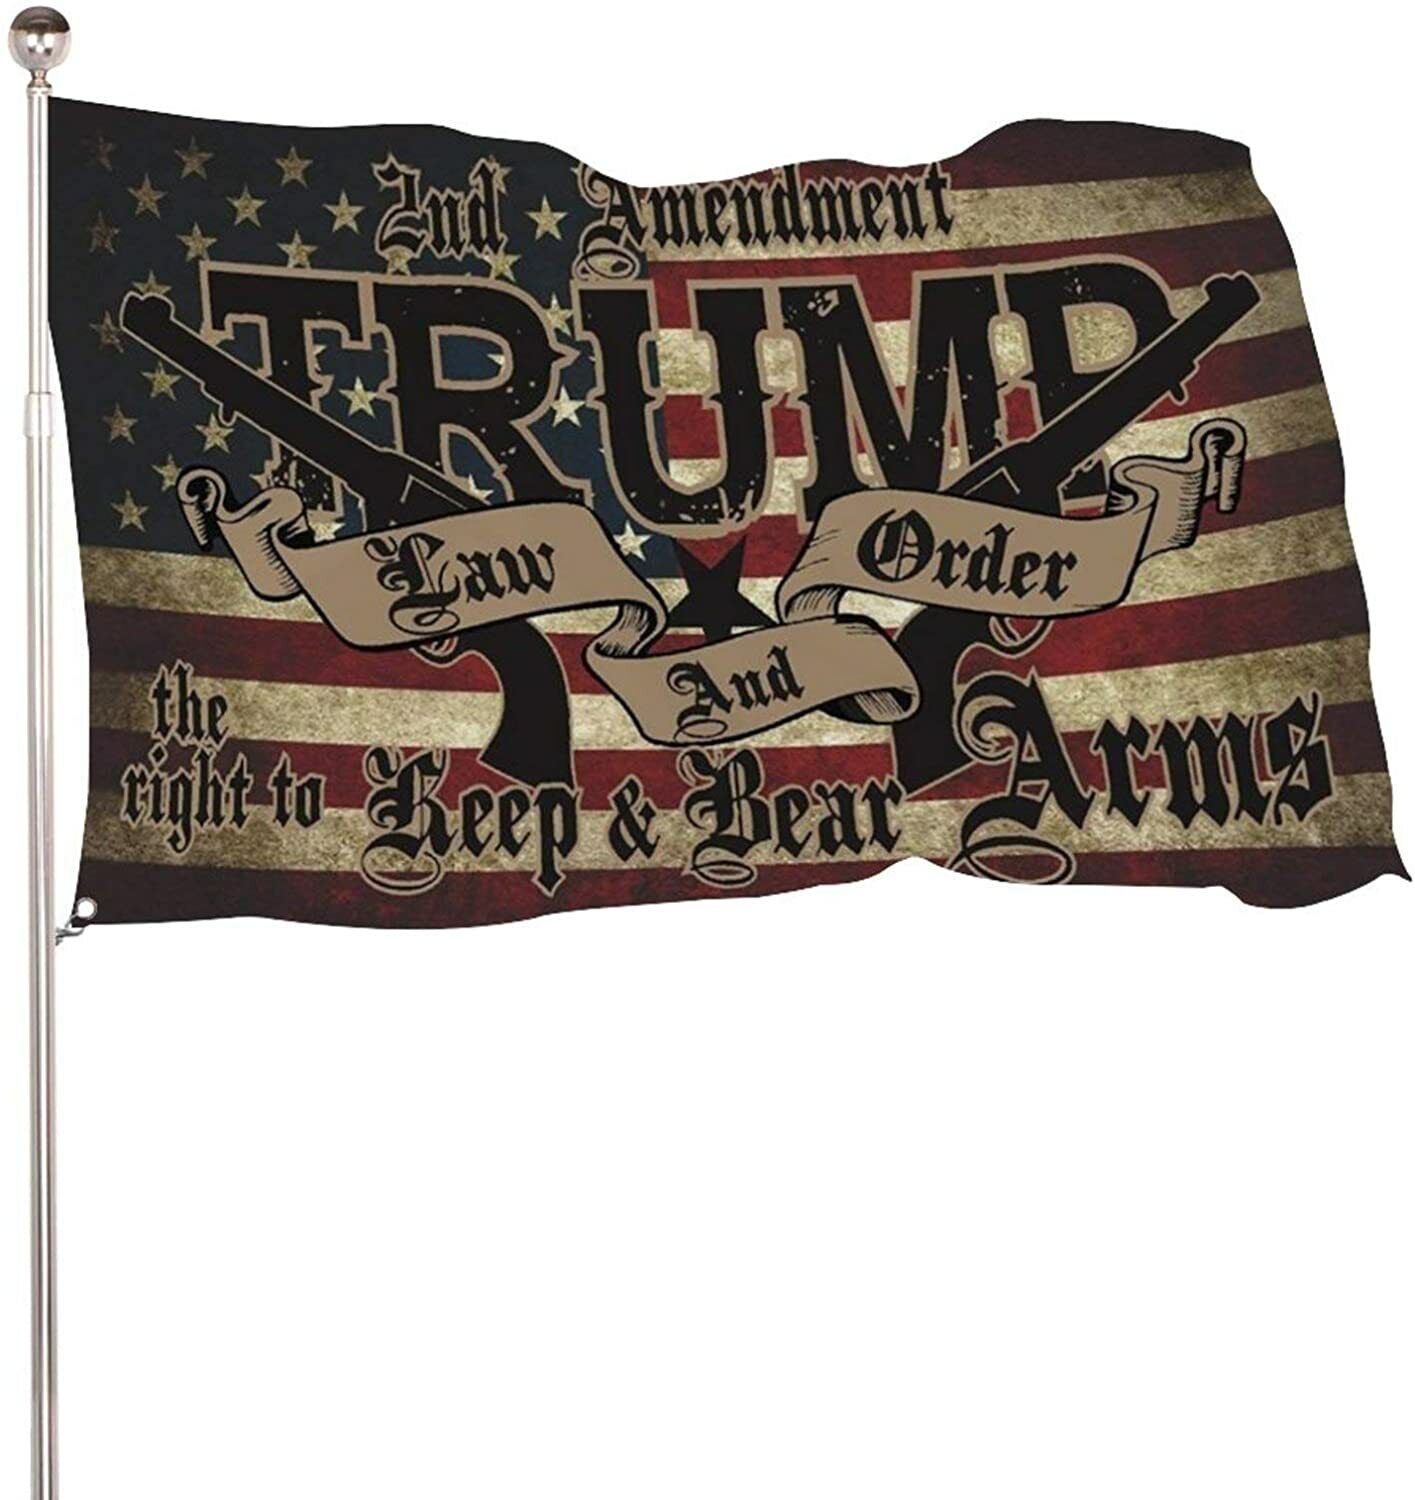 2nd Amendment Trump Law And Order The Right To Keep & Bear Arms 3Ft x 5FT